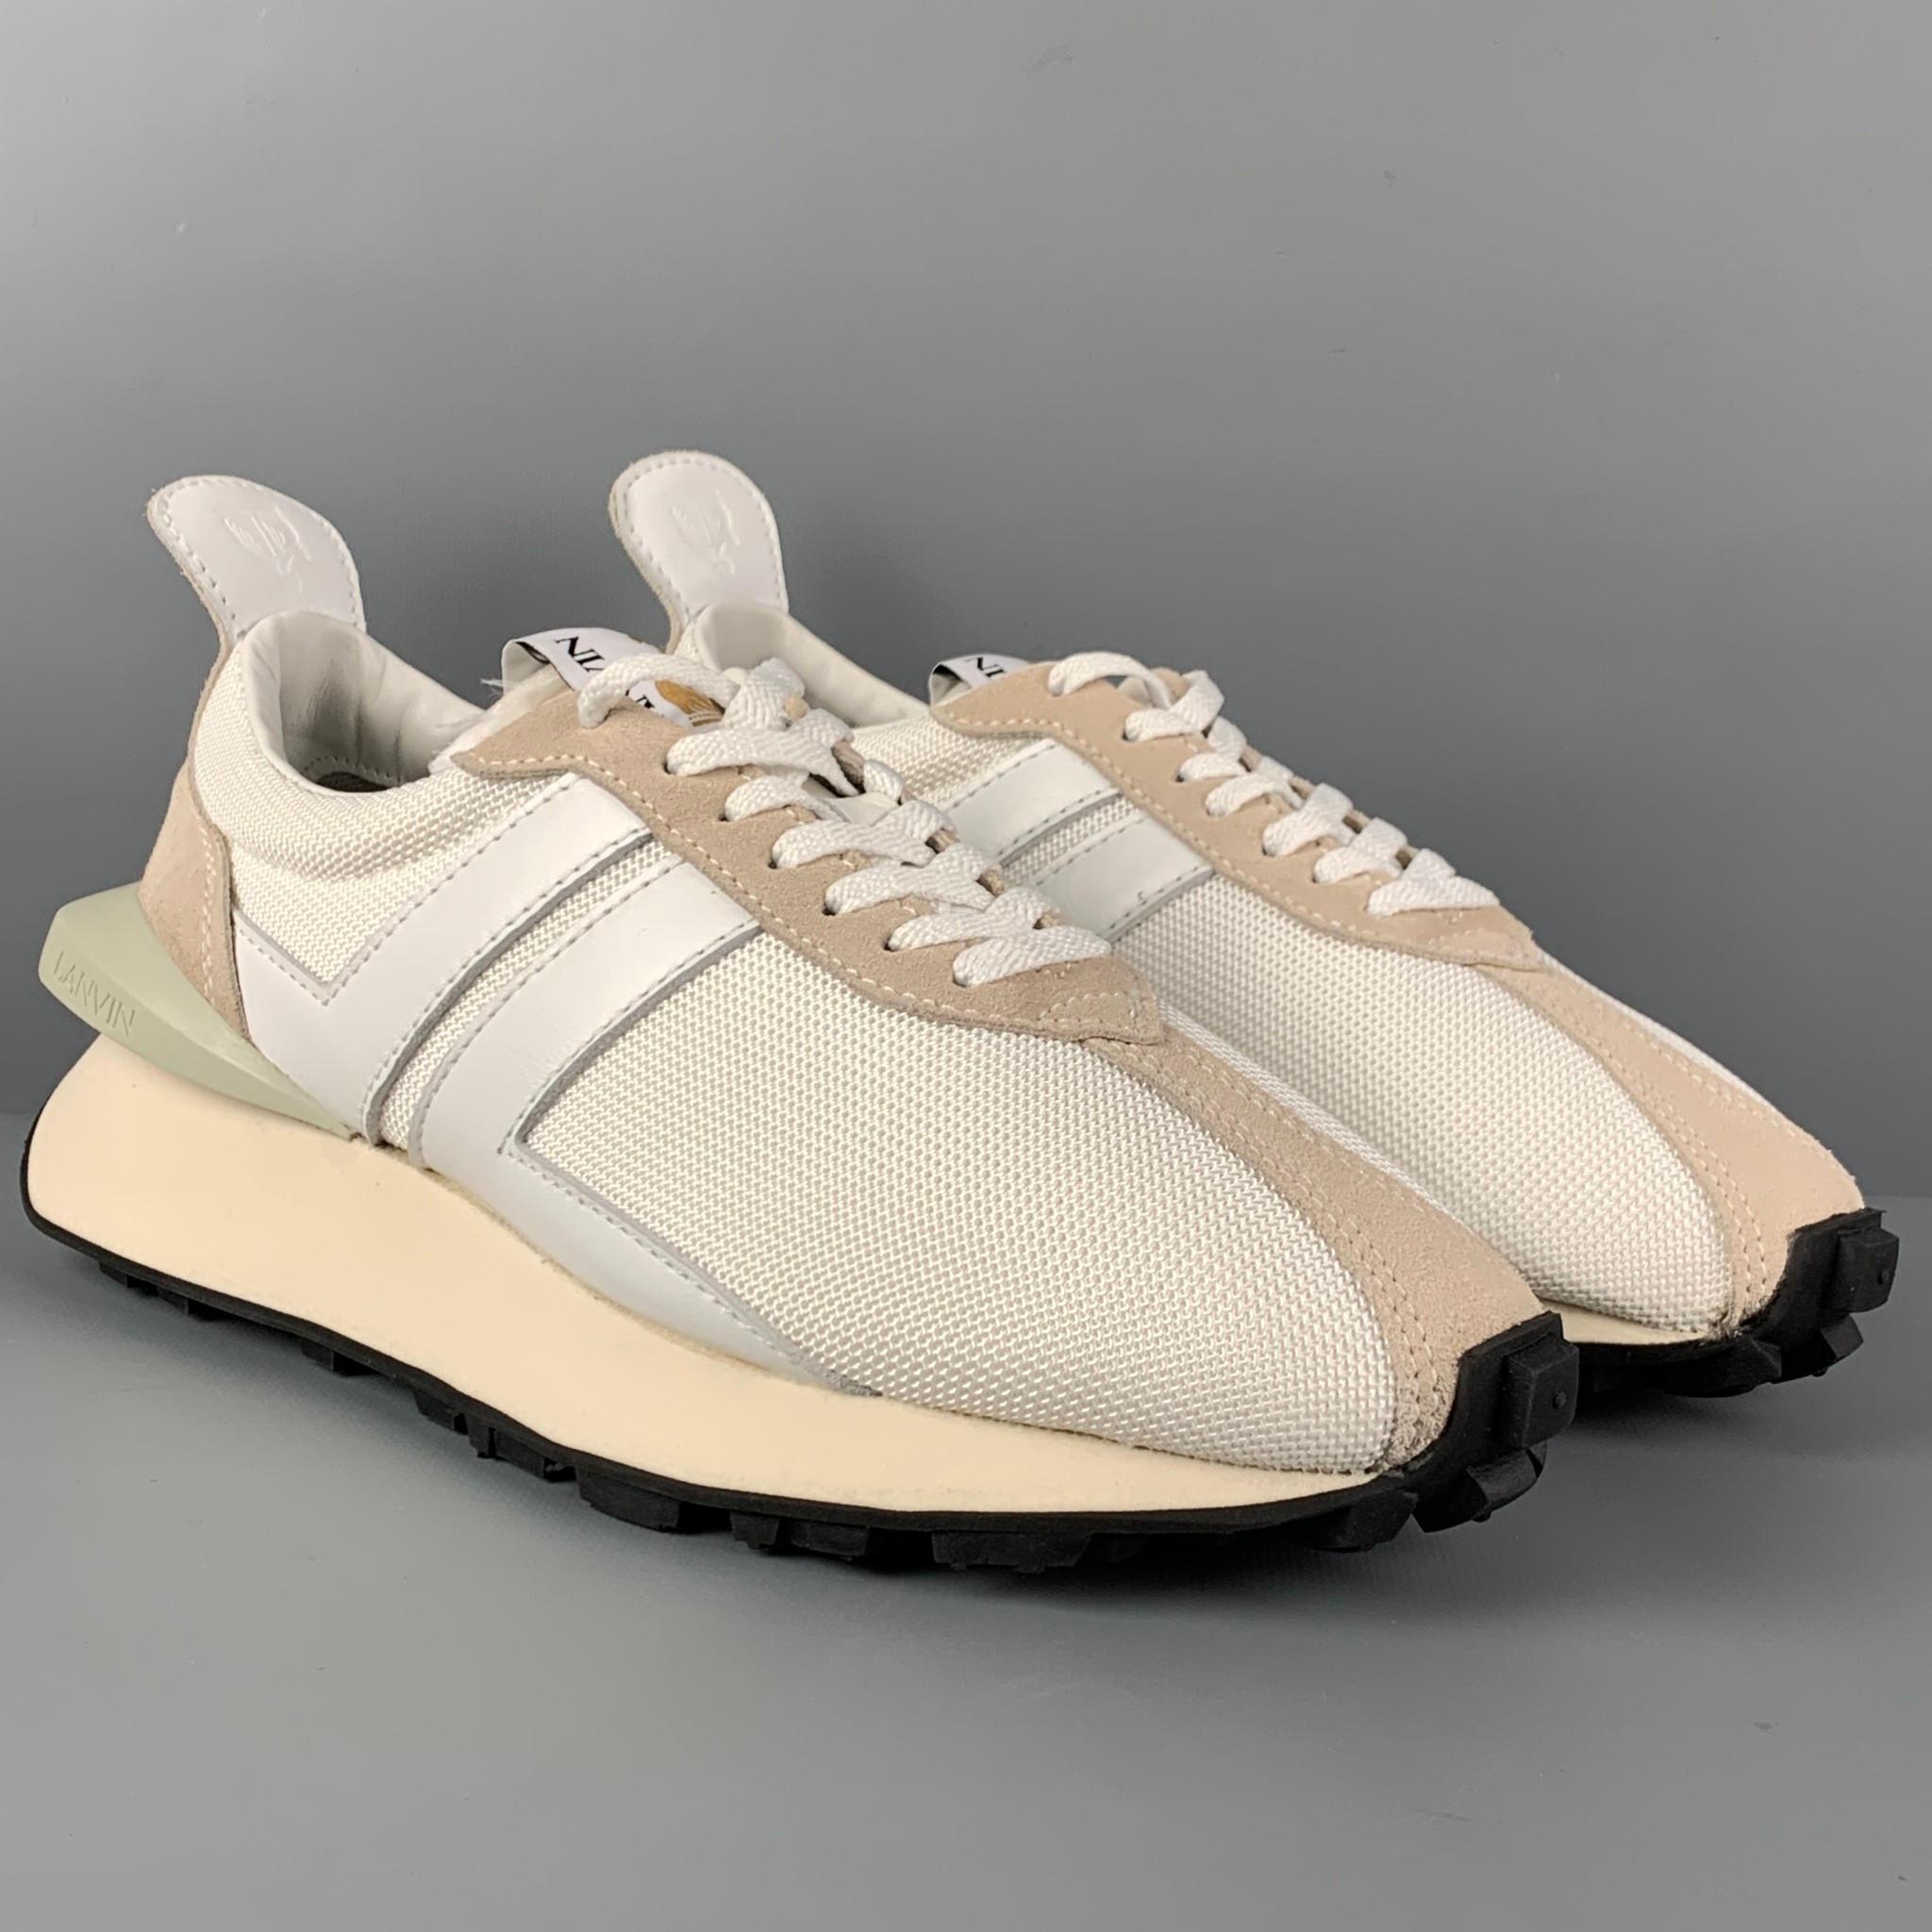 LANVIN sneakers comes in a white mixed materials featuring a chunky rubber sole and a lace up closure. Made in Portugal. 

New With Box. 
Marked: 12
Original Retail Price: $550.00

Outsole: 12.5 in. x 4.5 in. 